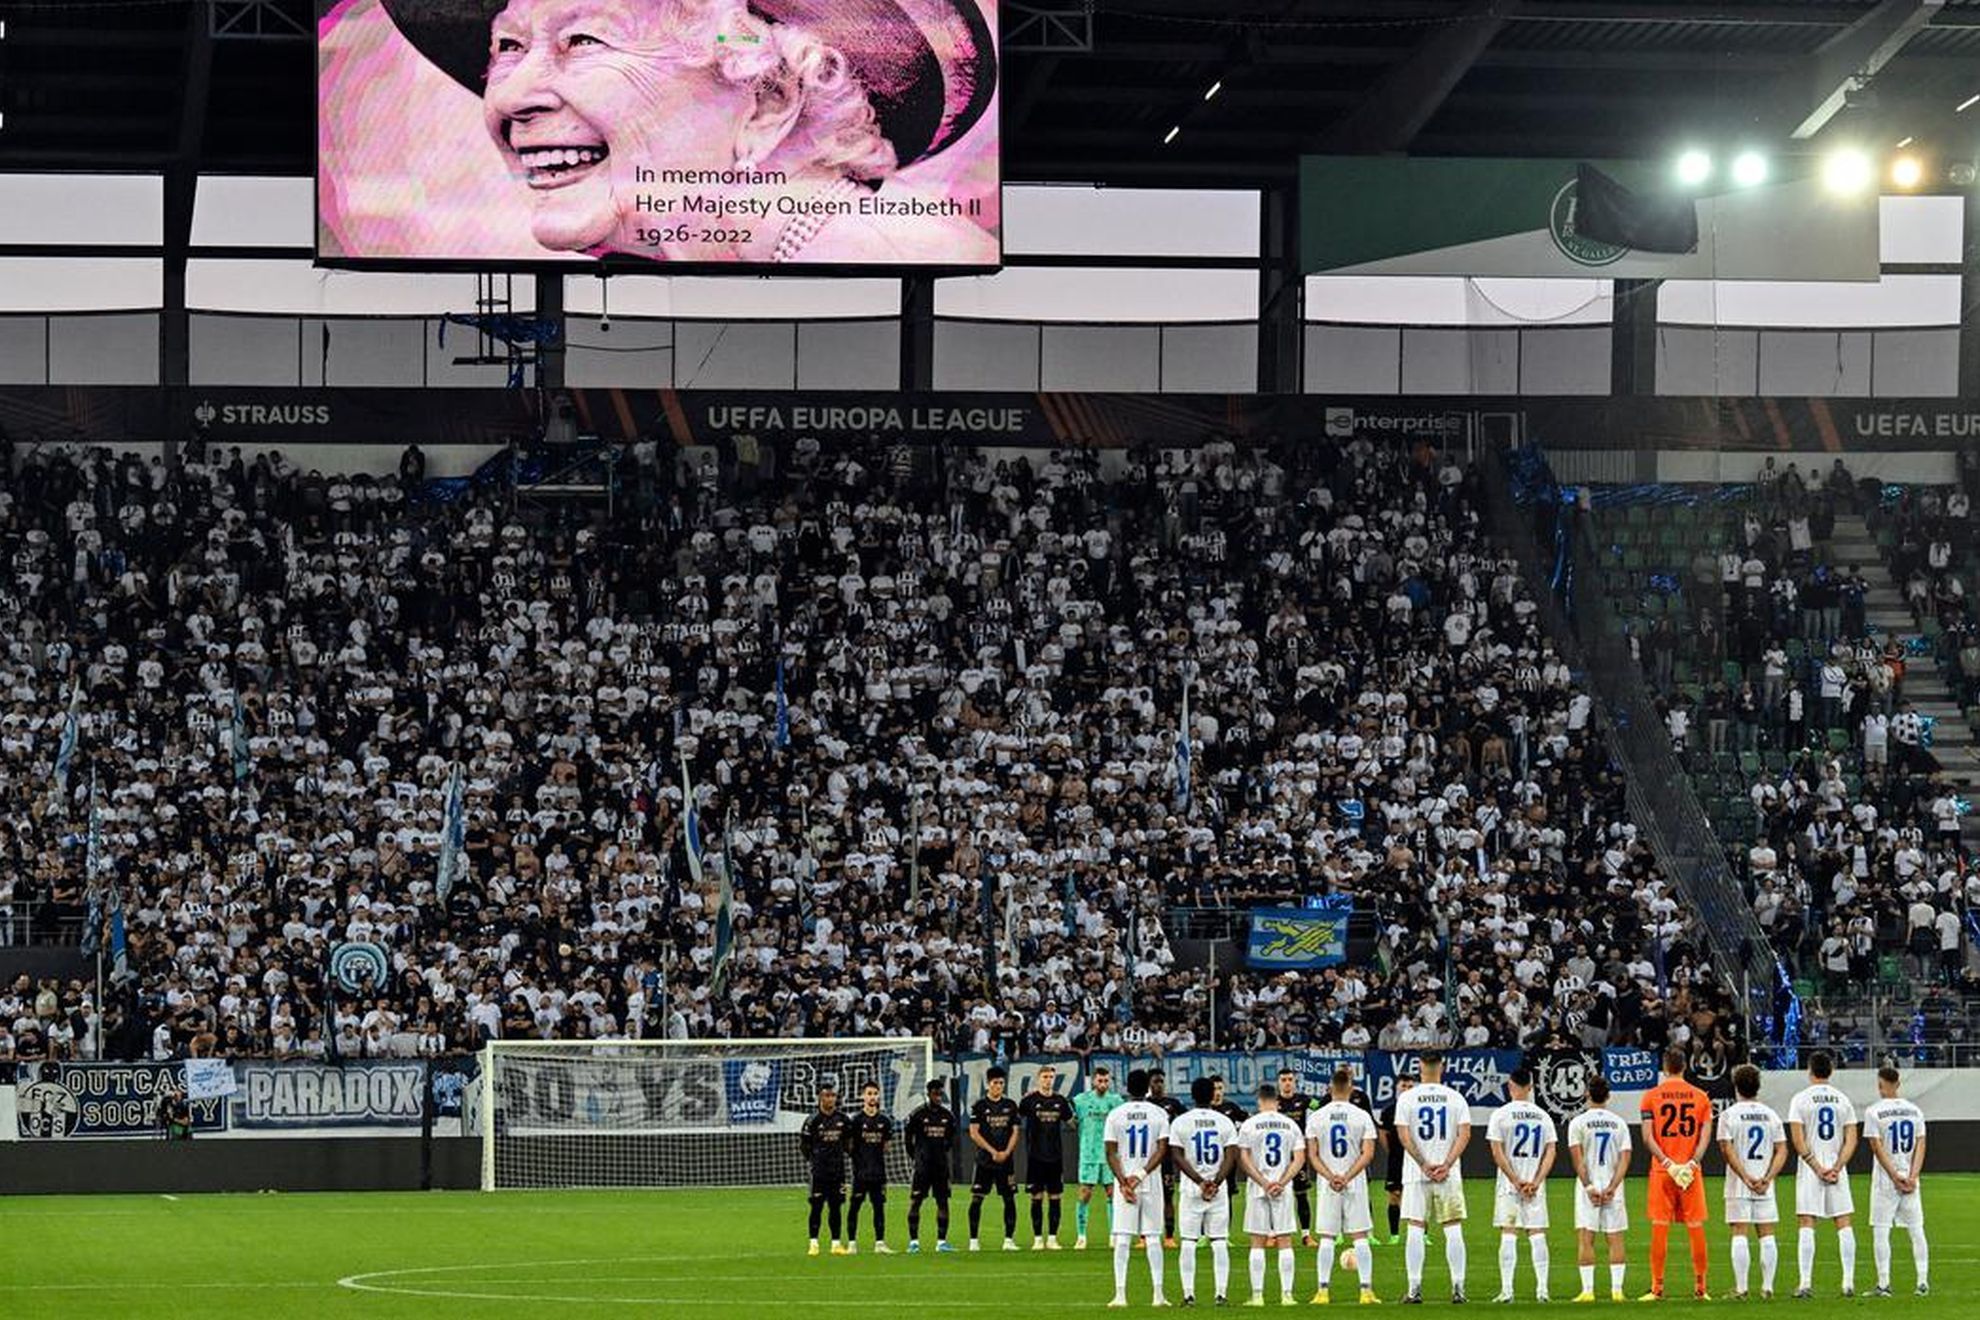 Arsenal hold mid-game minute of silence for Queen Elizabeth II... which is booed by Zurich fans! / Photo: AP